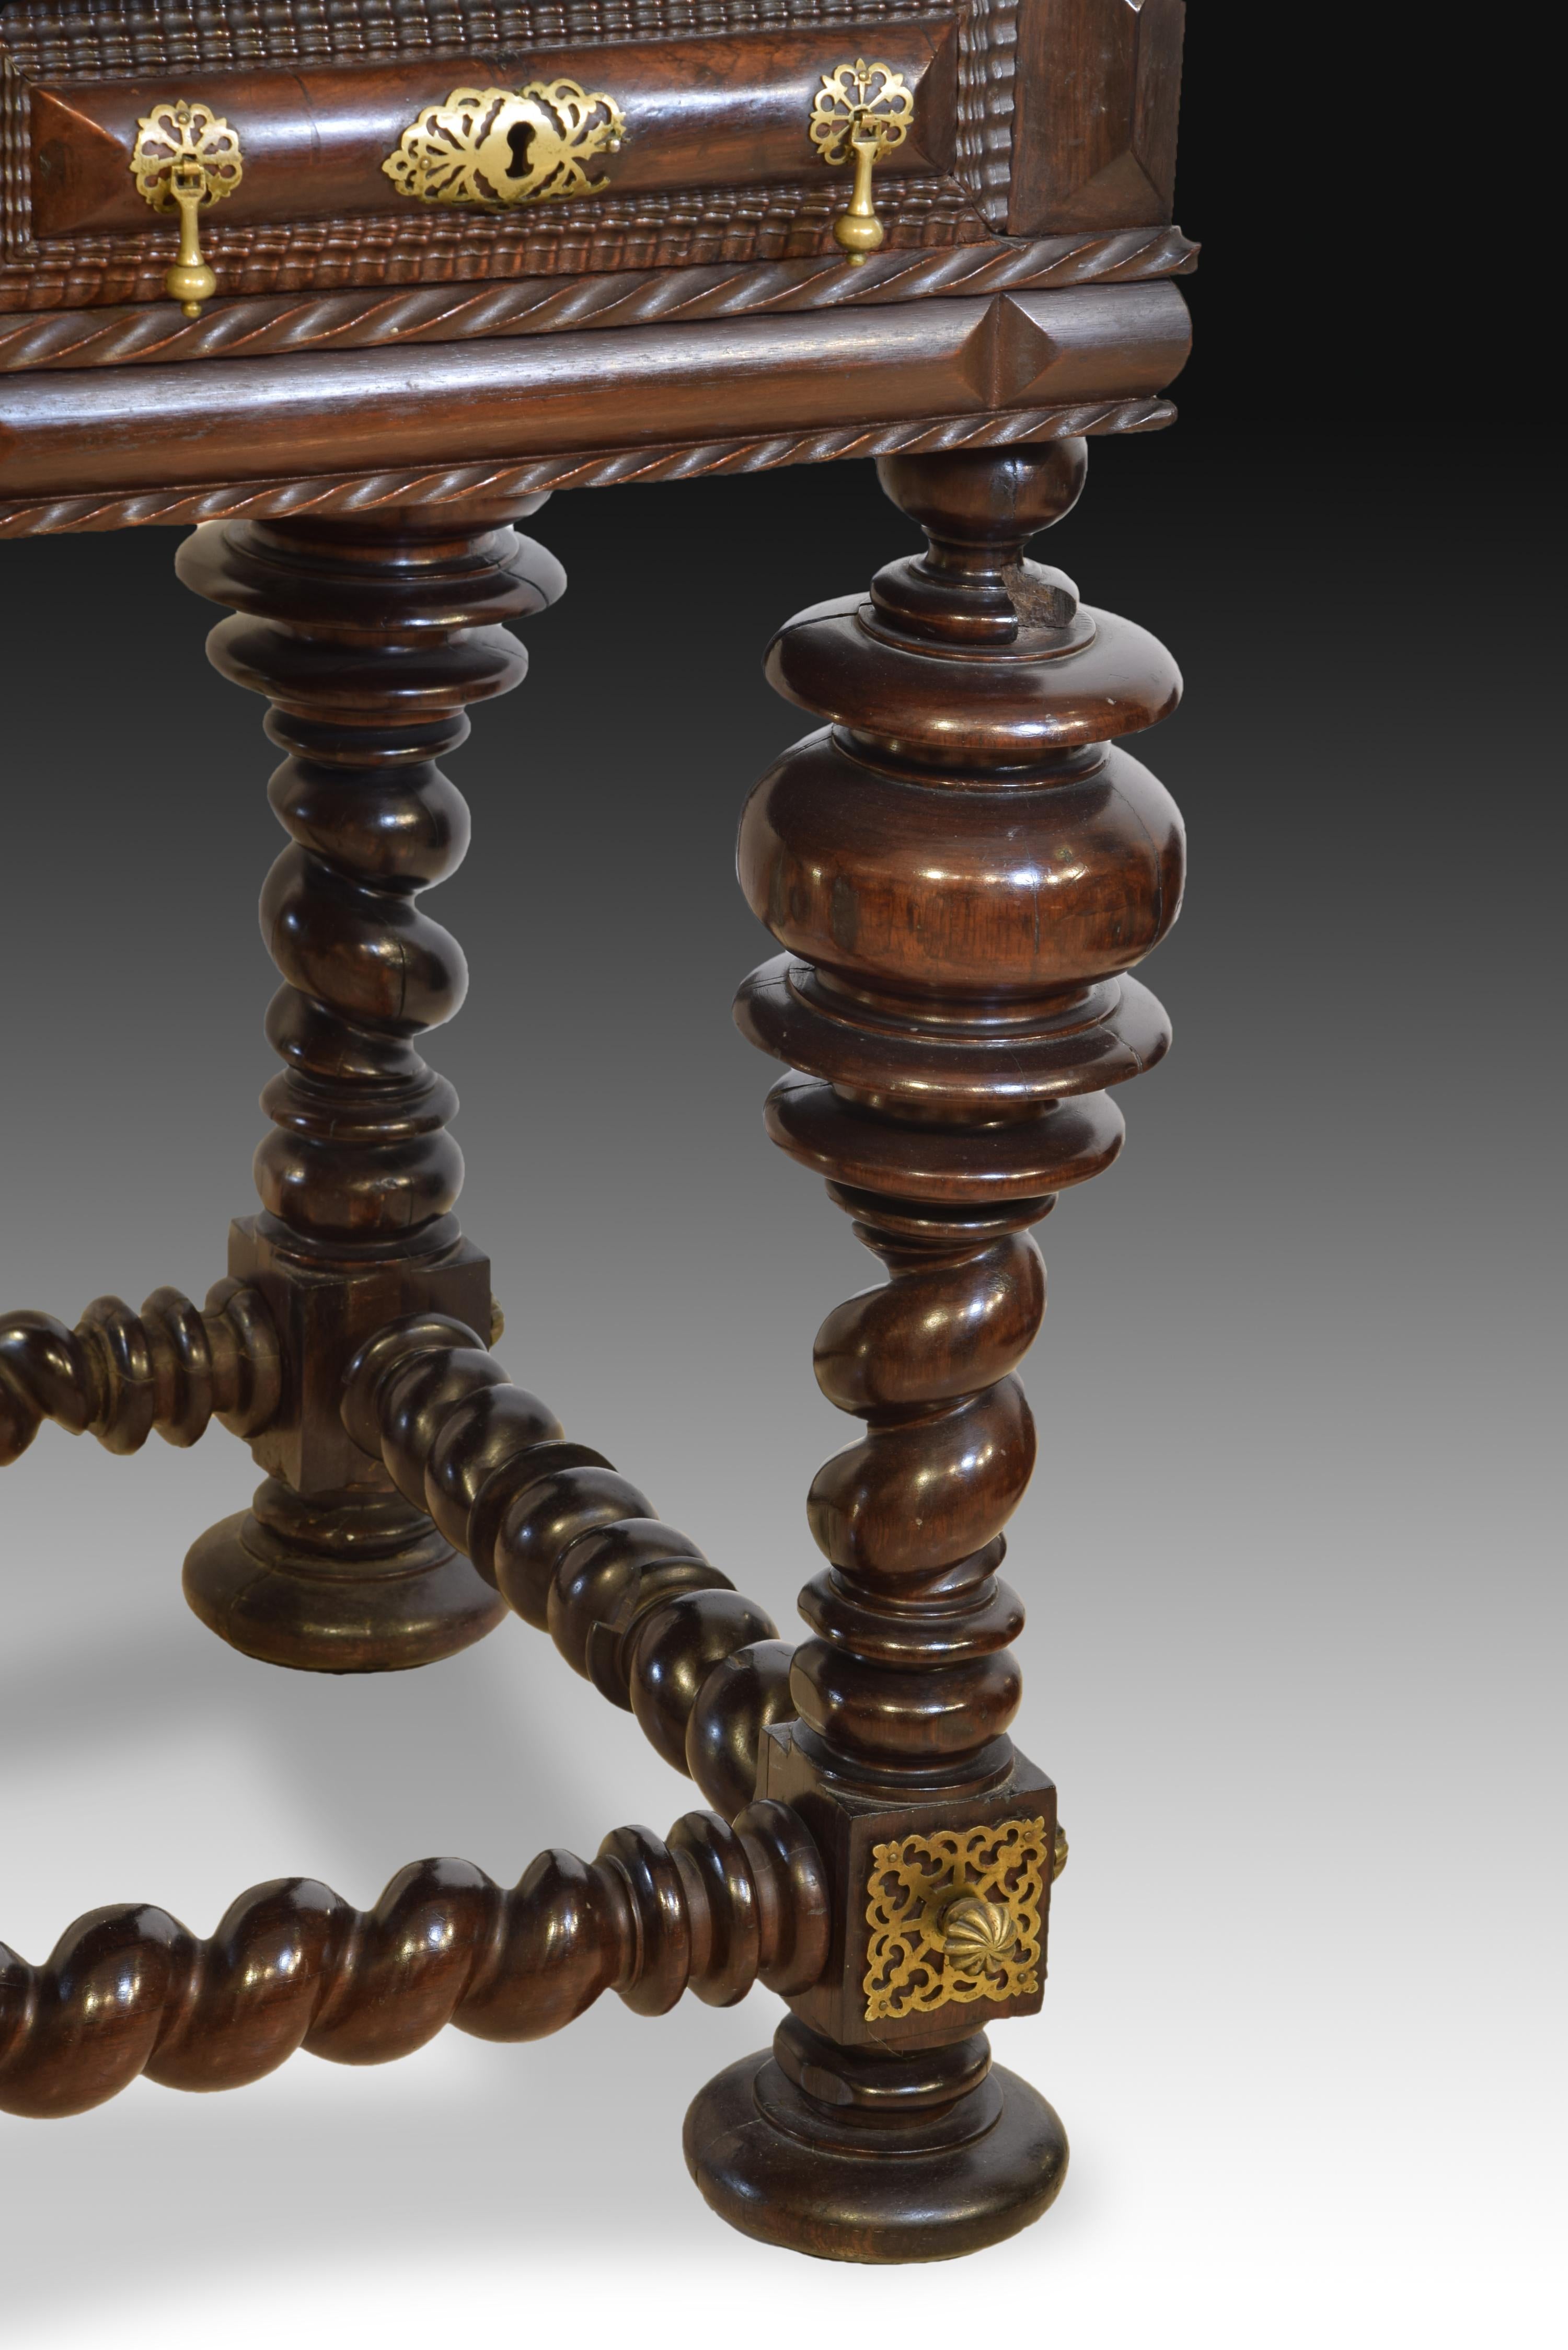 Other Table, Palosanto 'Rose Wood or Holy Wood', Portuguese School, 18th and 19th C